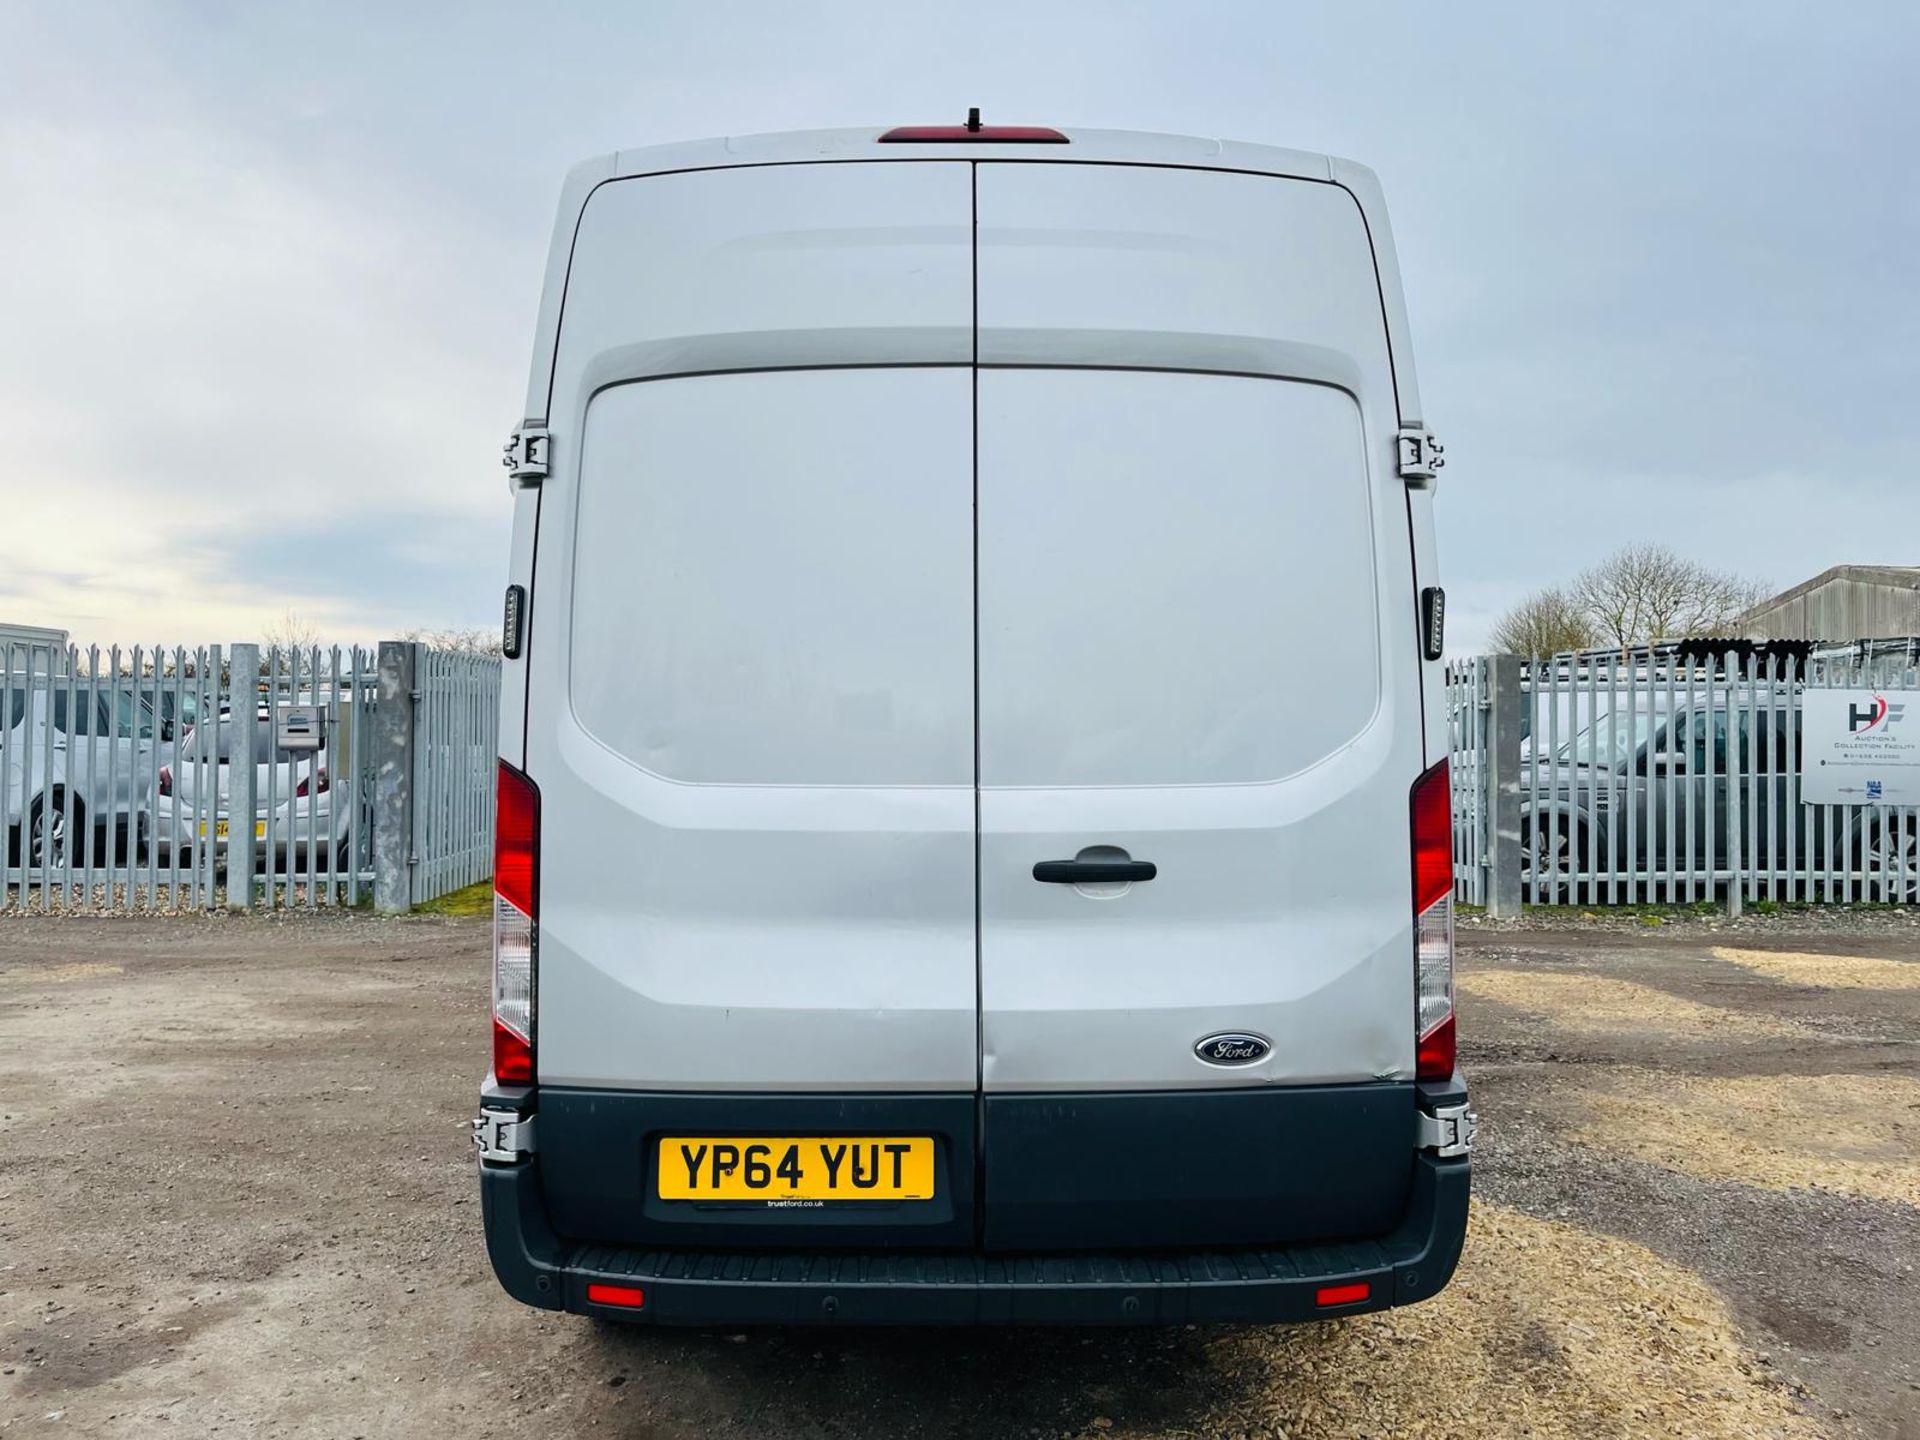 Ford Transit Trend 350 TDCI 125 2.2 L3 H3 2014 '64 Reg' - Parking sensors - Air Conditioning - Image 9 of 27